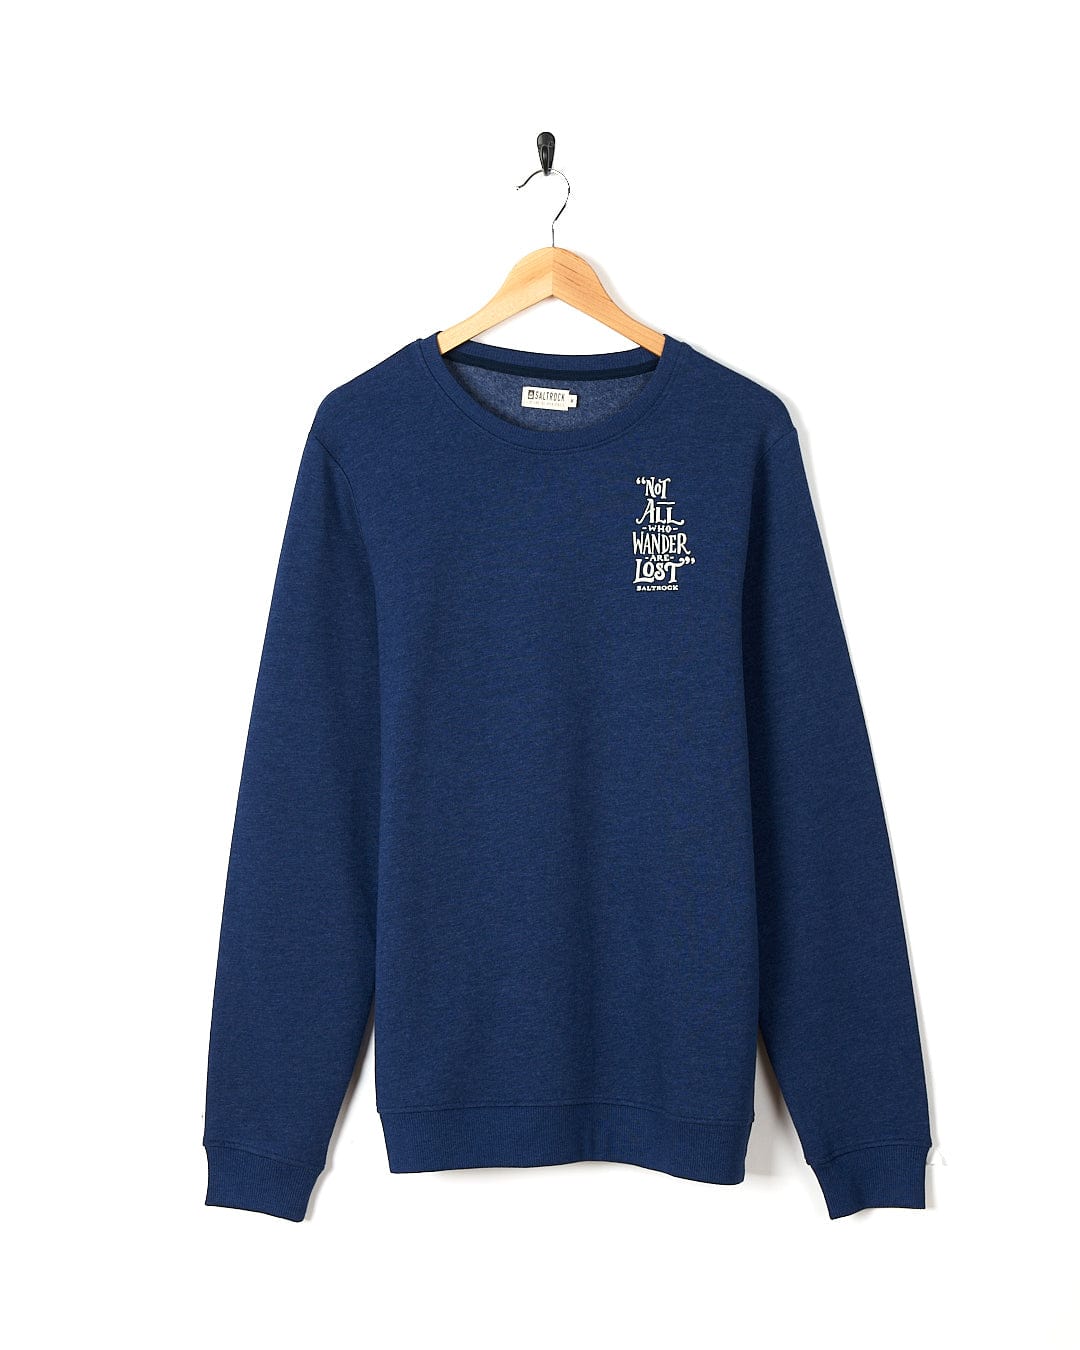 A Lost Ships - Mens Crew Sweat - Dark Blue sweatshirt with a Saltrock embroidered logo on it.